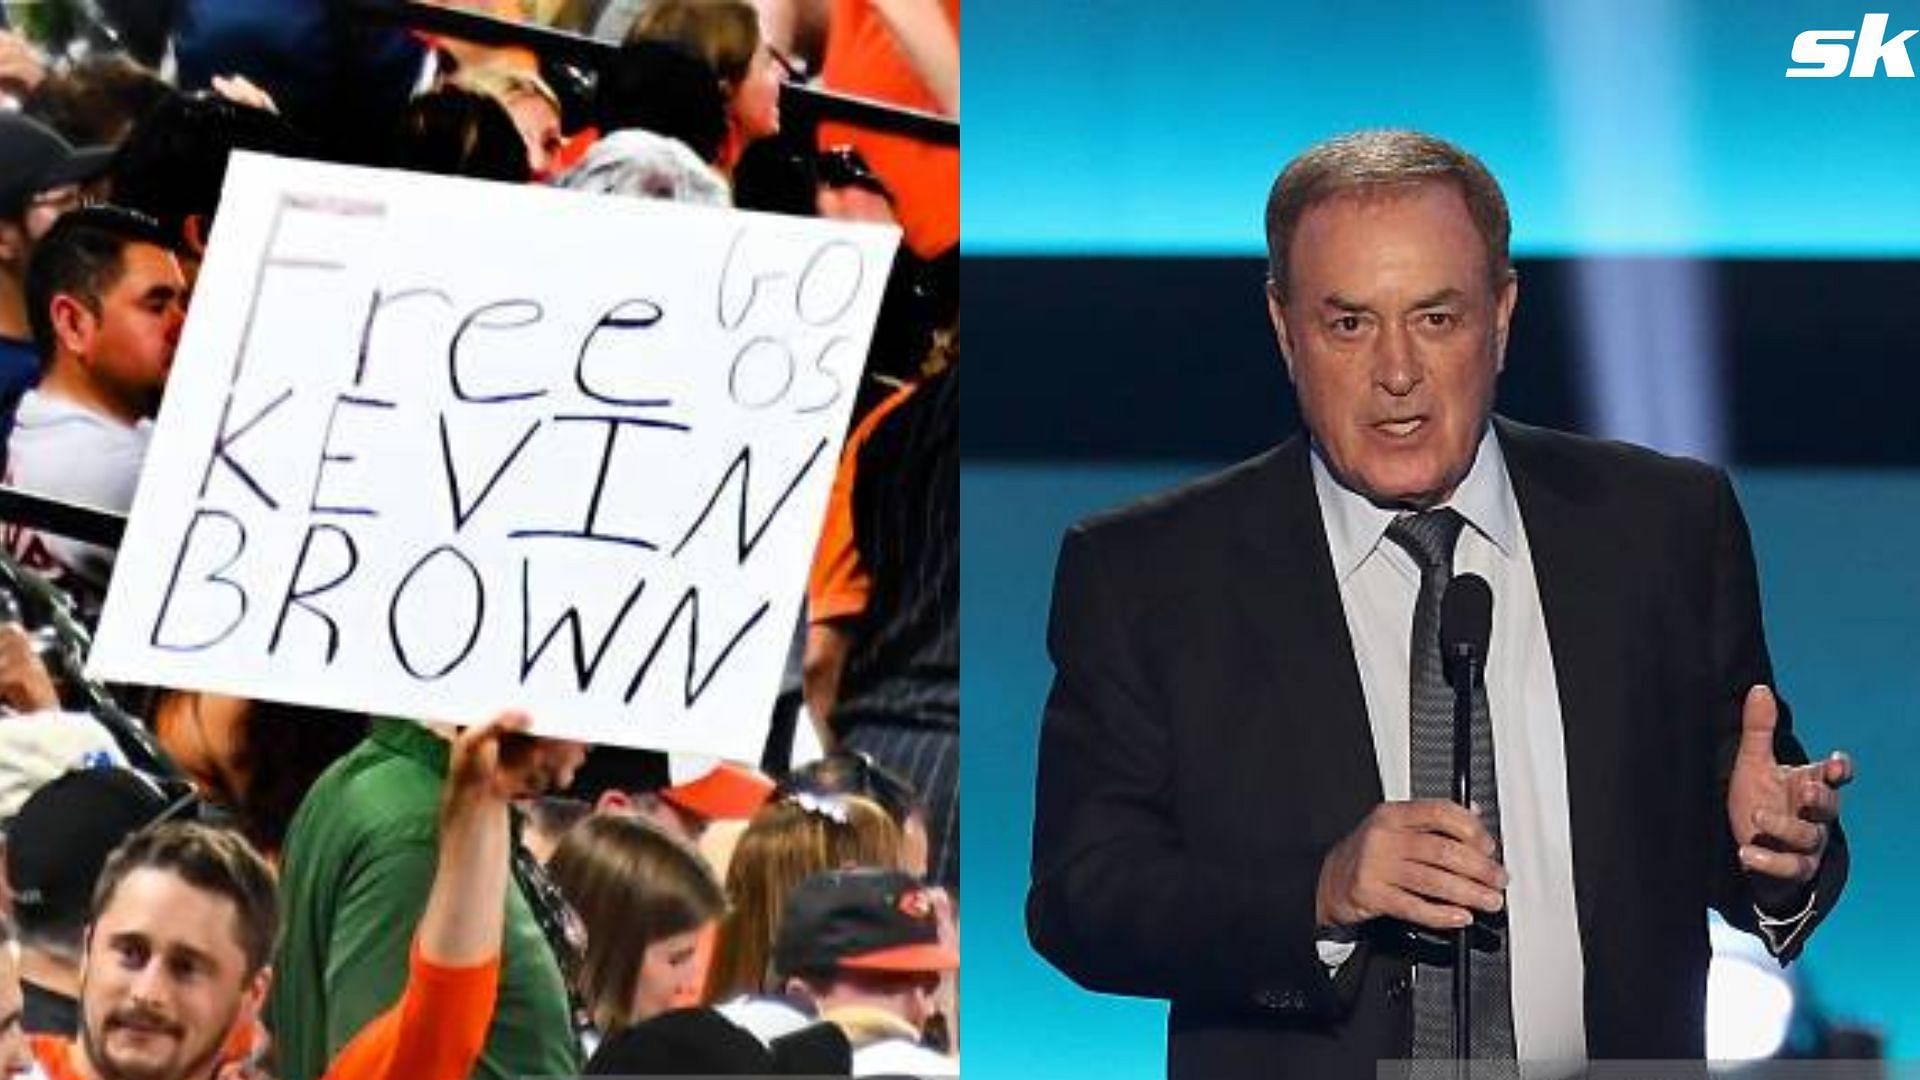  Kevin Brown suspension: Sportscaster Al Michaels demands action from the Orioles, suggest to 